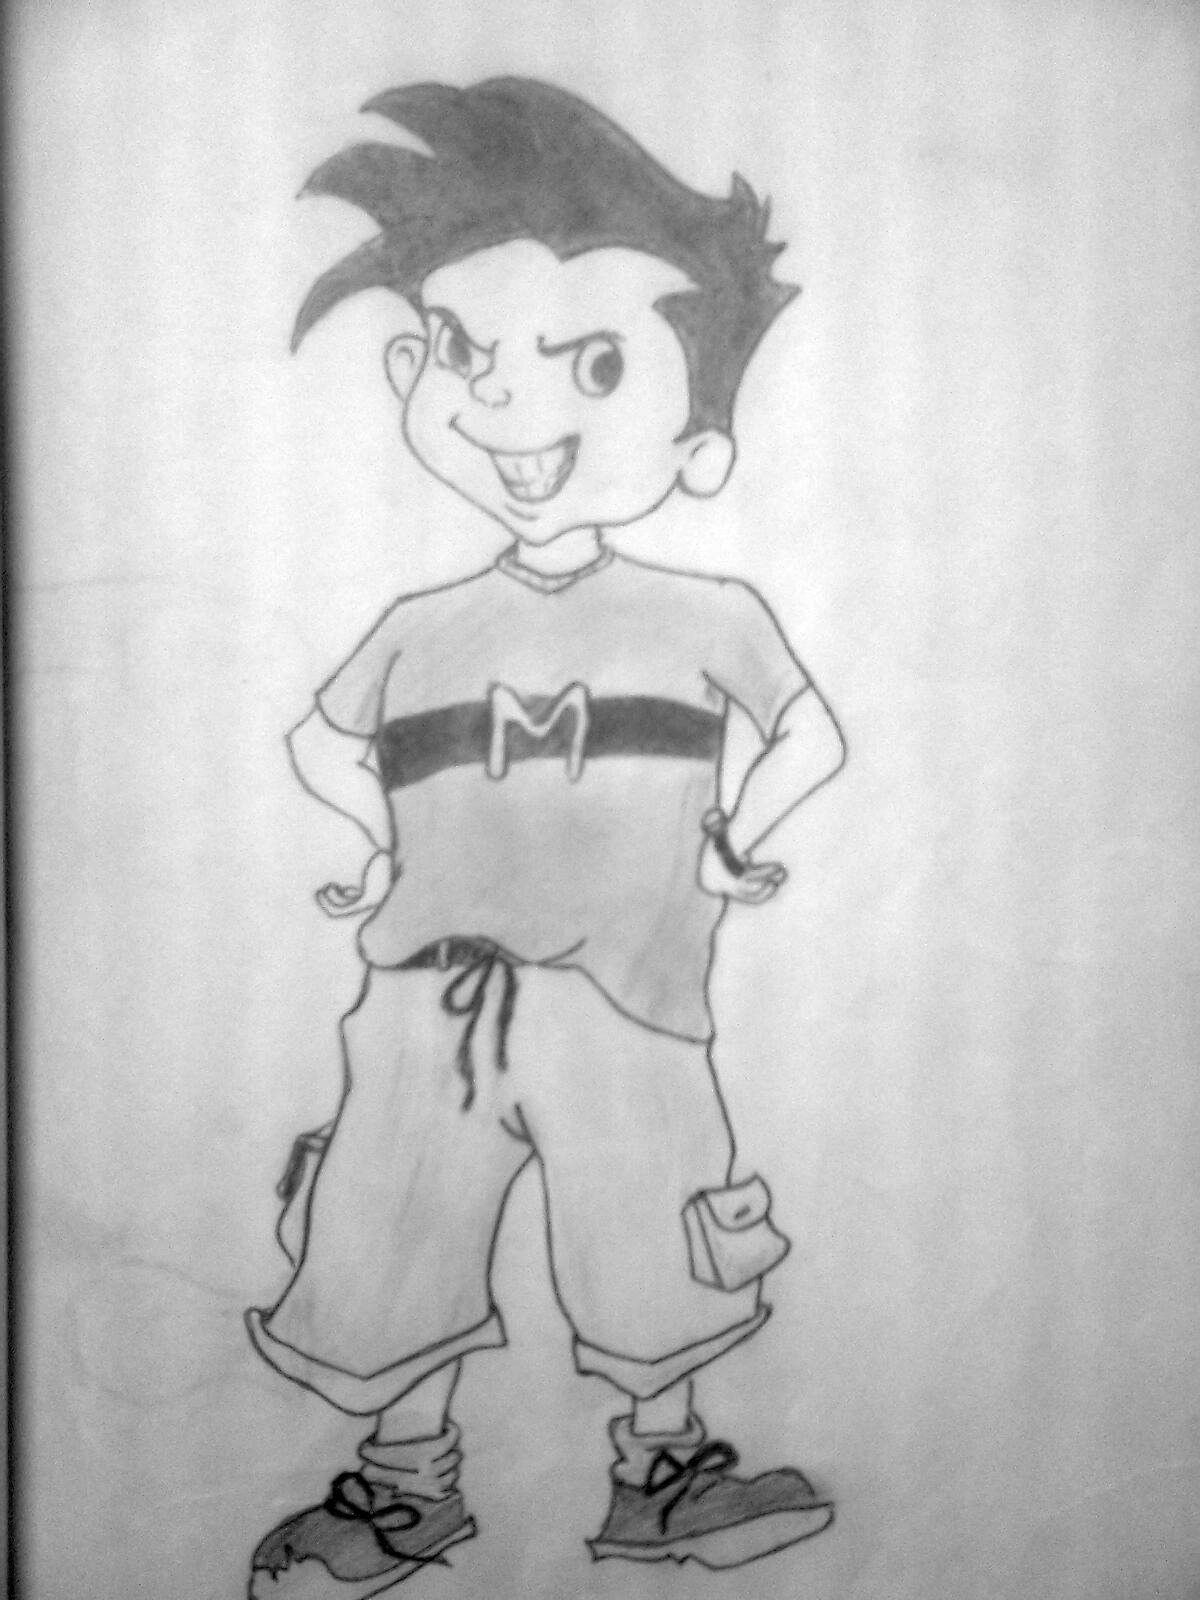 BeSt TimE WiT mY 2 LoVeLy FrdS.. pEnCil & PapEr :): Hum Tum cartoon ...